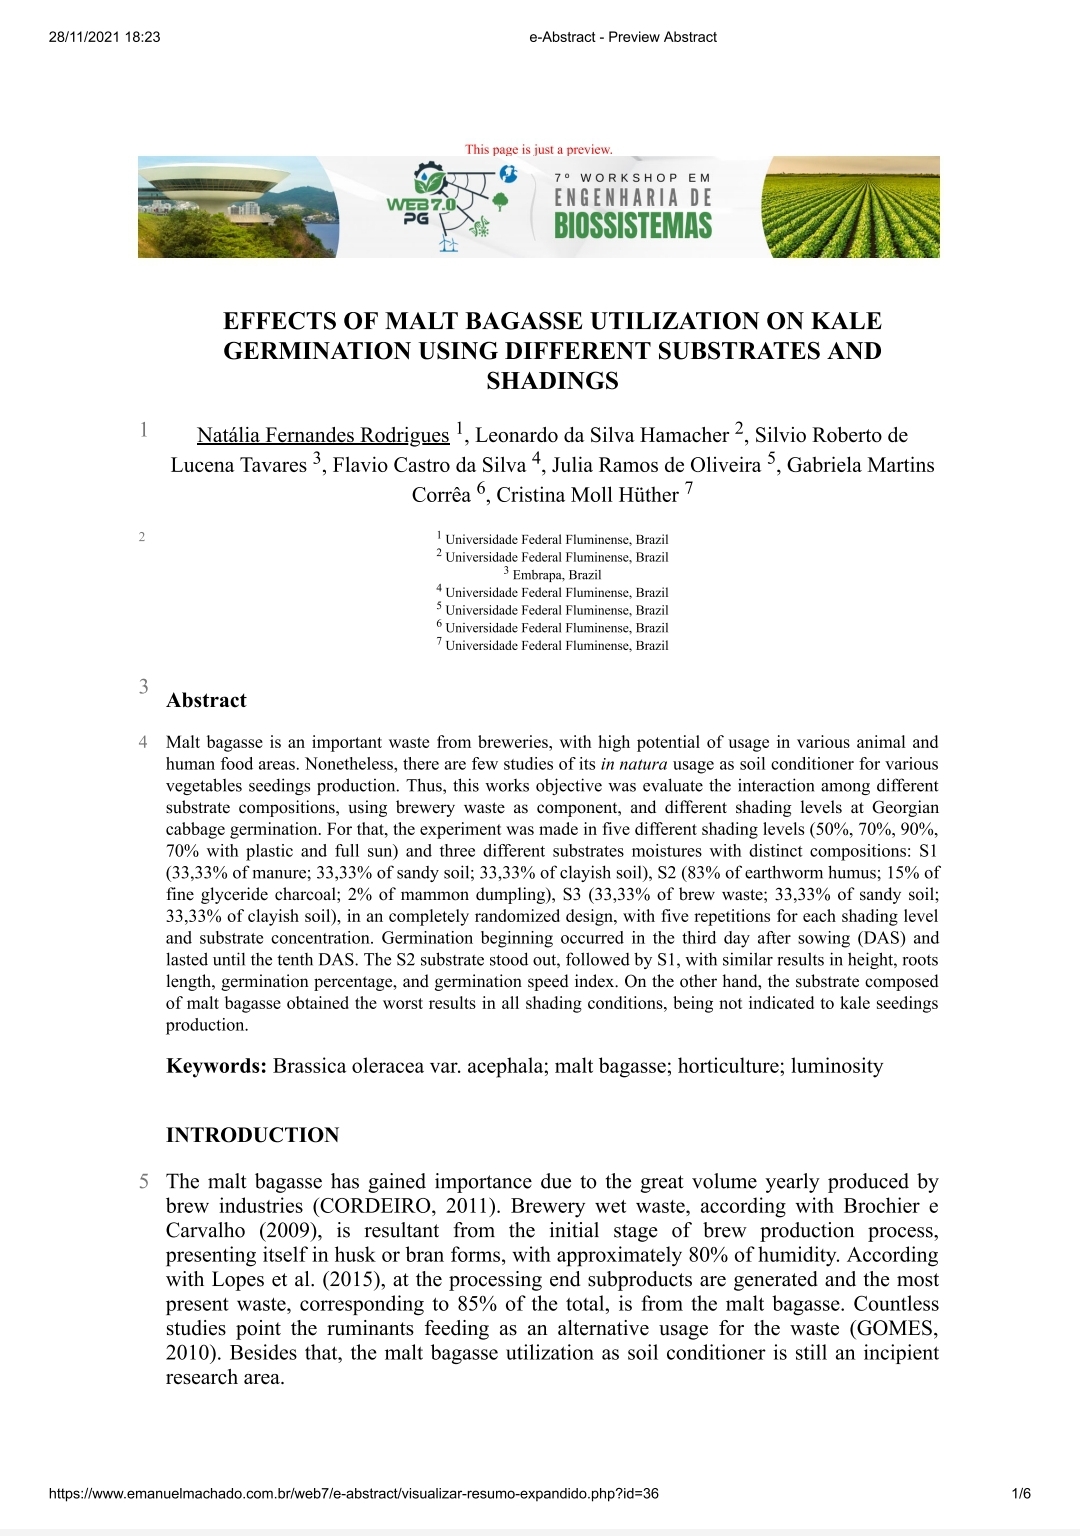 Artigo: Effects of Malt Bagasse Utilization on Kale Germination Using Different Substrates and Shadings